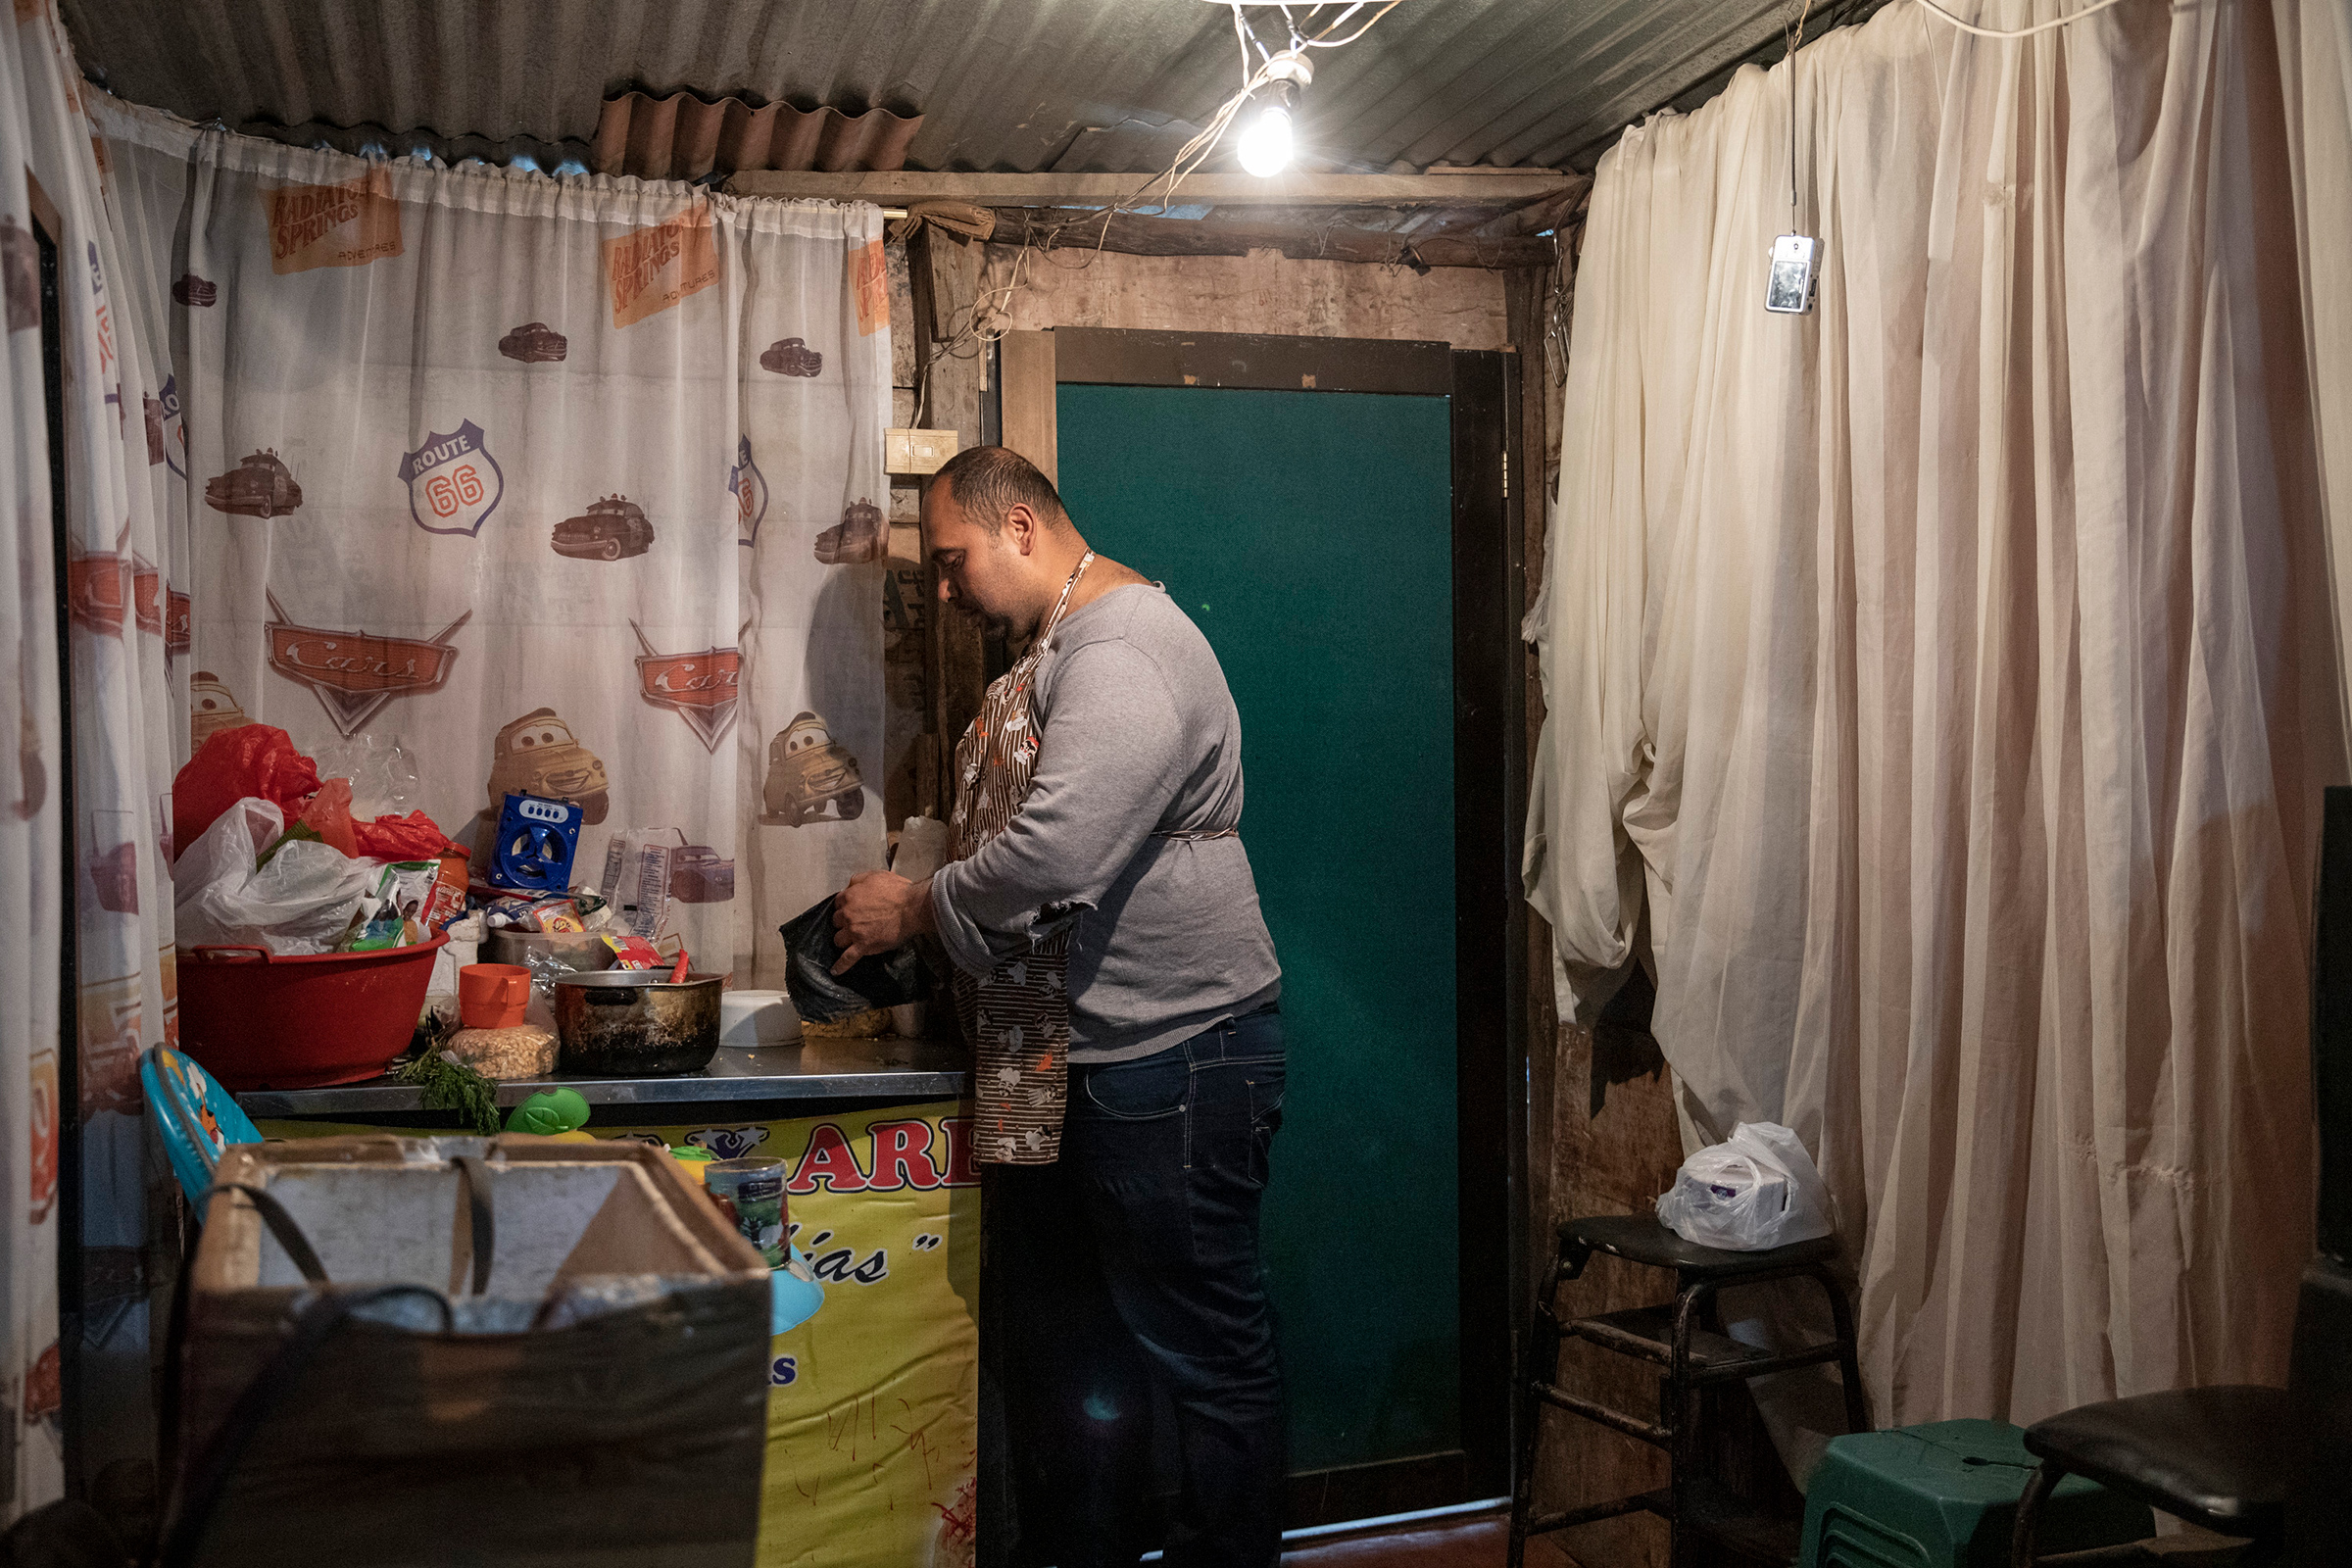 Nixon Valera, who arrived in 2018, wakes at 5:30 a.m. every day to make empanadas to sell on the streets of Bogotá; in Venezuela, he worked in the plastics industry. (Fabiola Ferrero—Magnum Foundation for TIME)